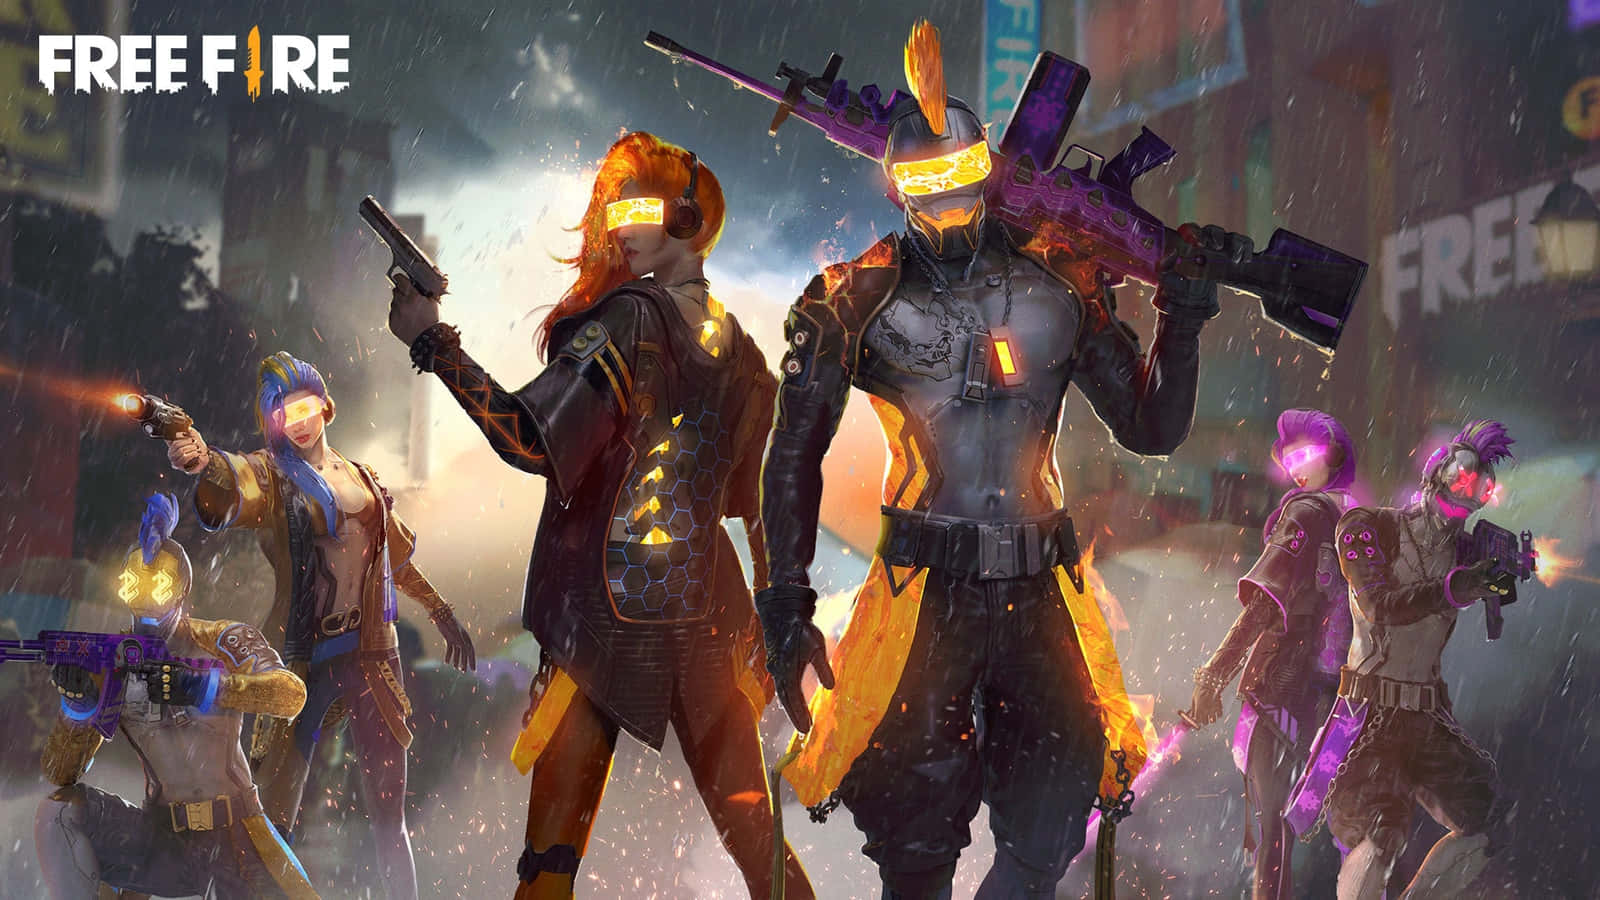 Descend into the future with the new Free Fire Chrono character Wallpaper